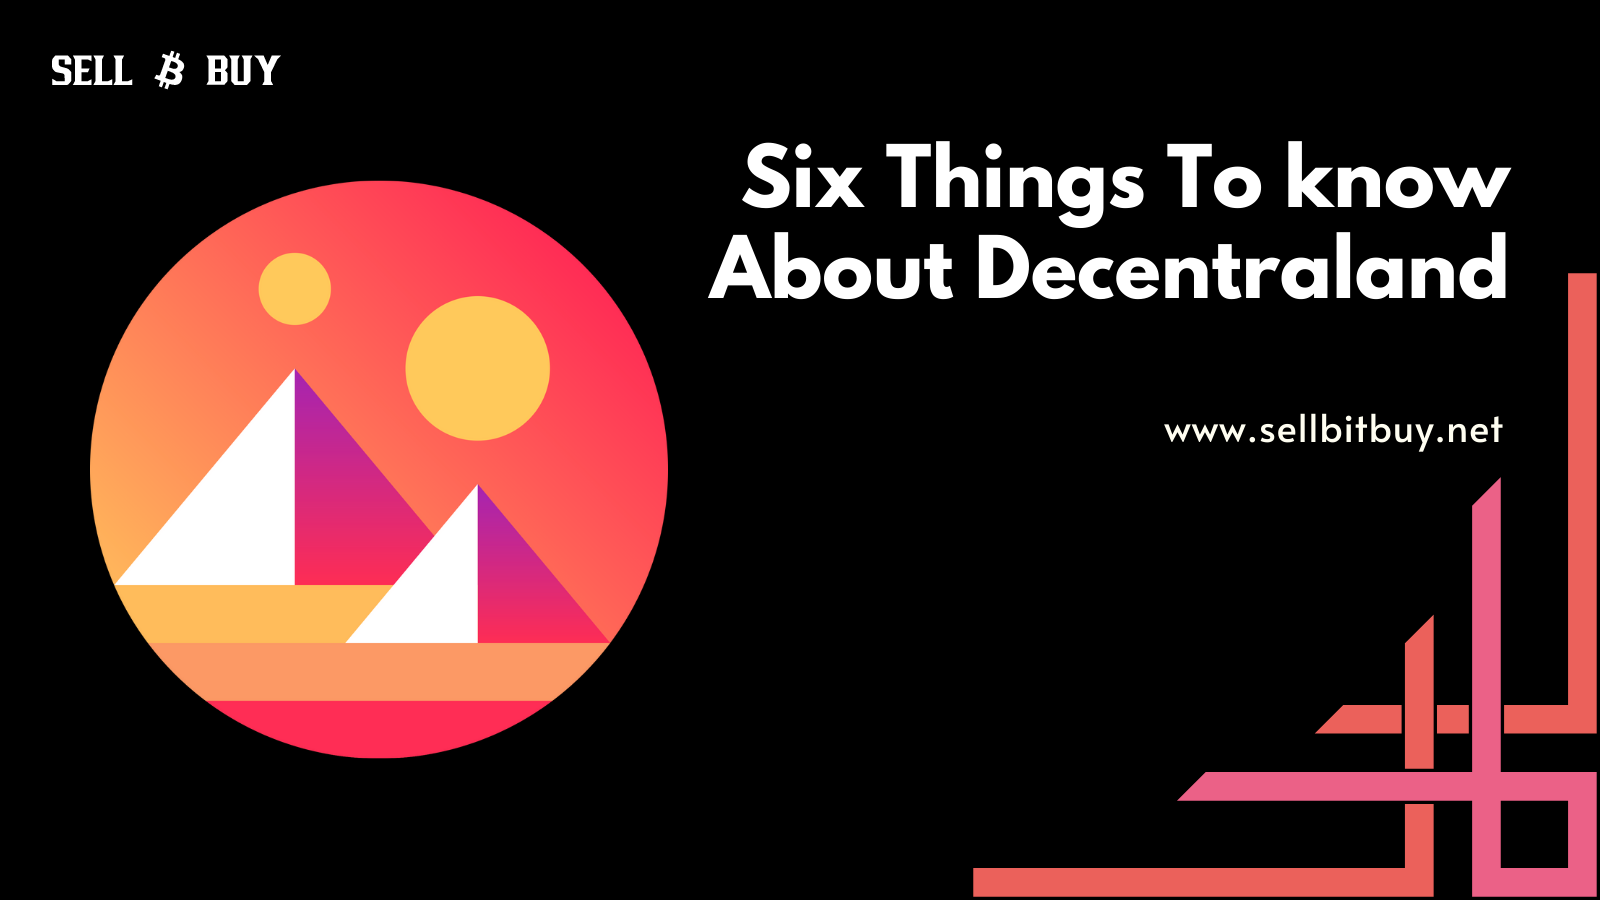 Article about Six Things To know About Decentraland